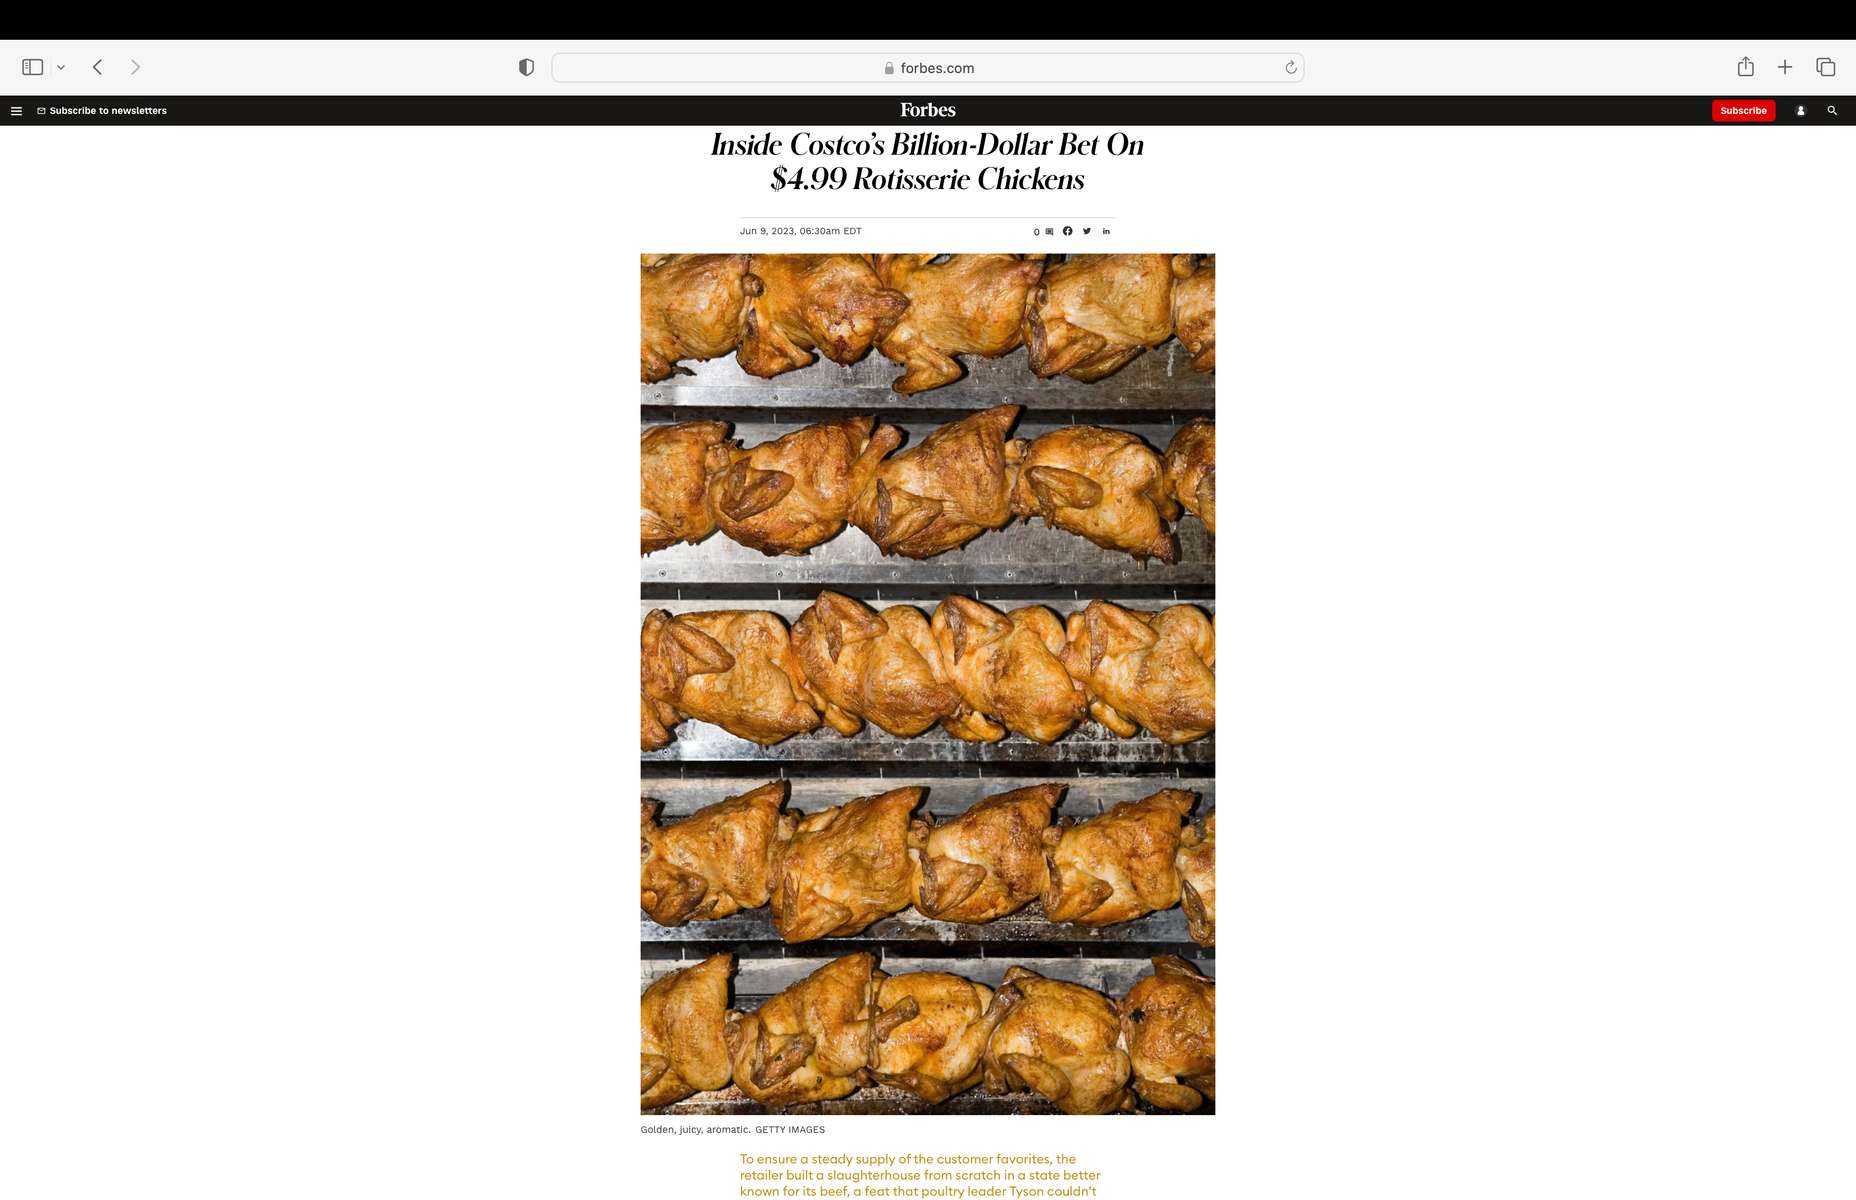 Costco's billion-dollar $4.99 rotisserie chicken  |  Photo research + edit for Forbes, 2023